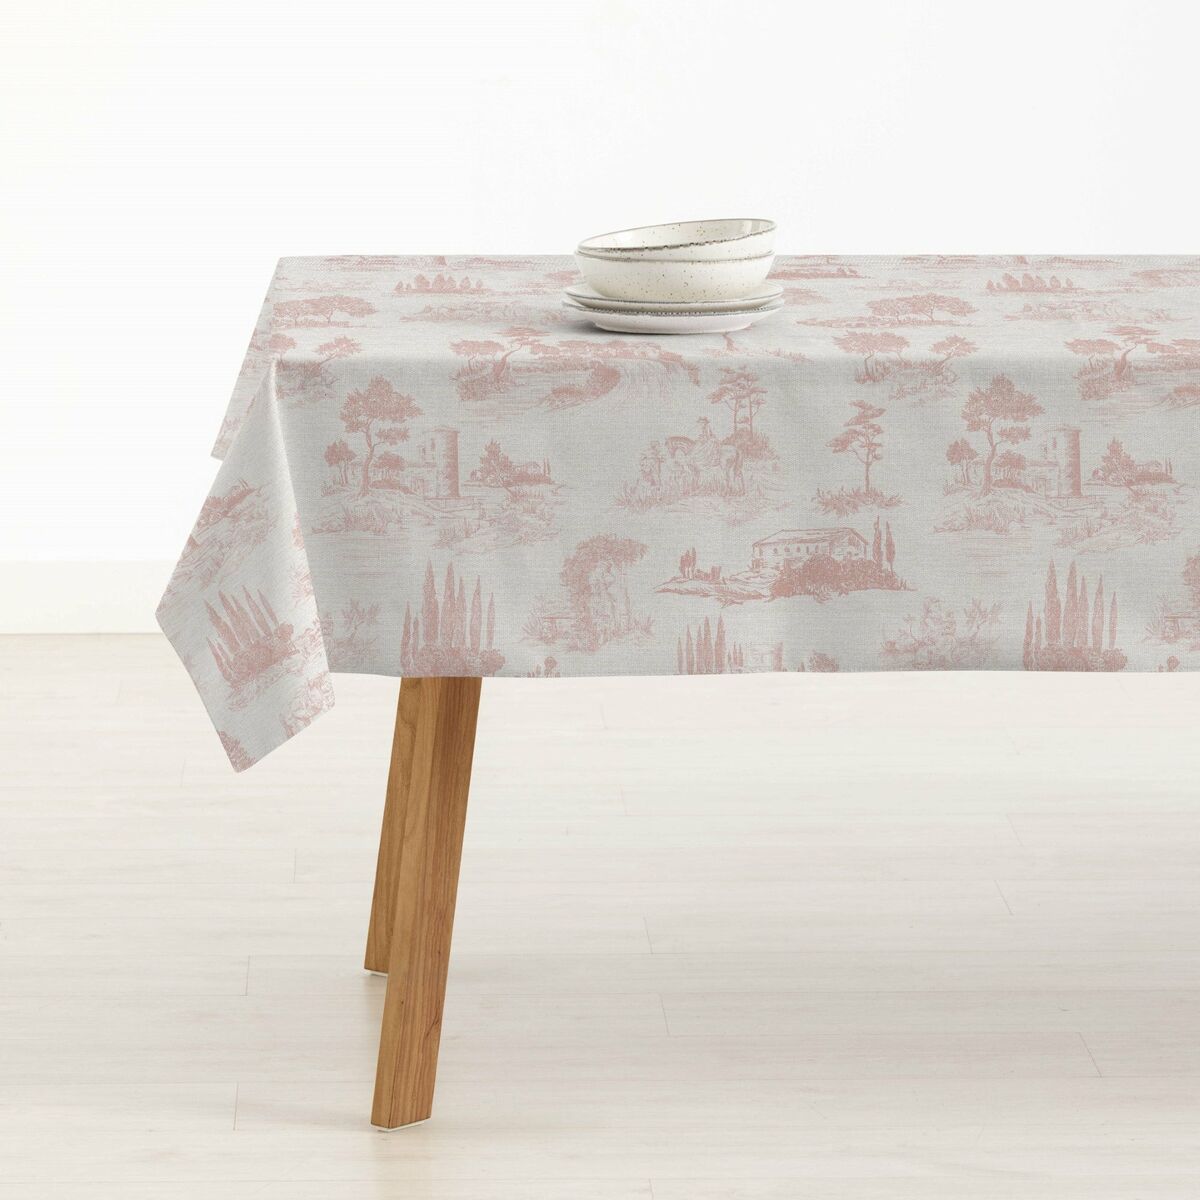 Stain-proof tablecloth Belum 0120-371 100 x 140 cm